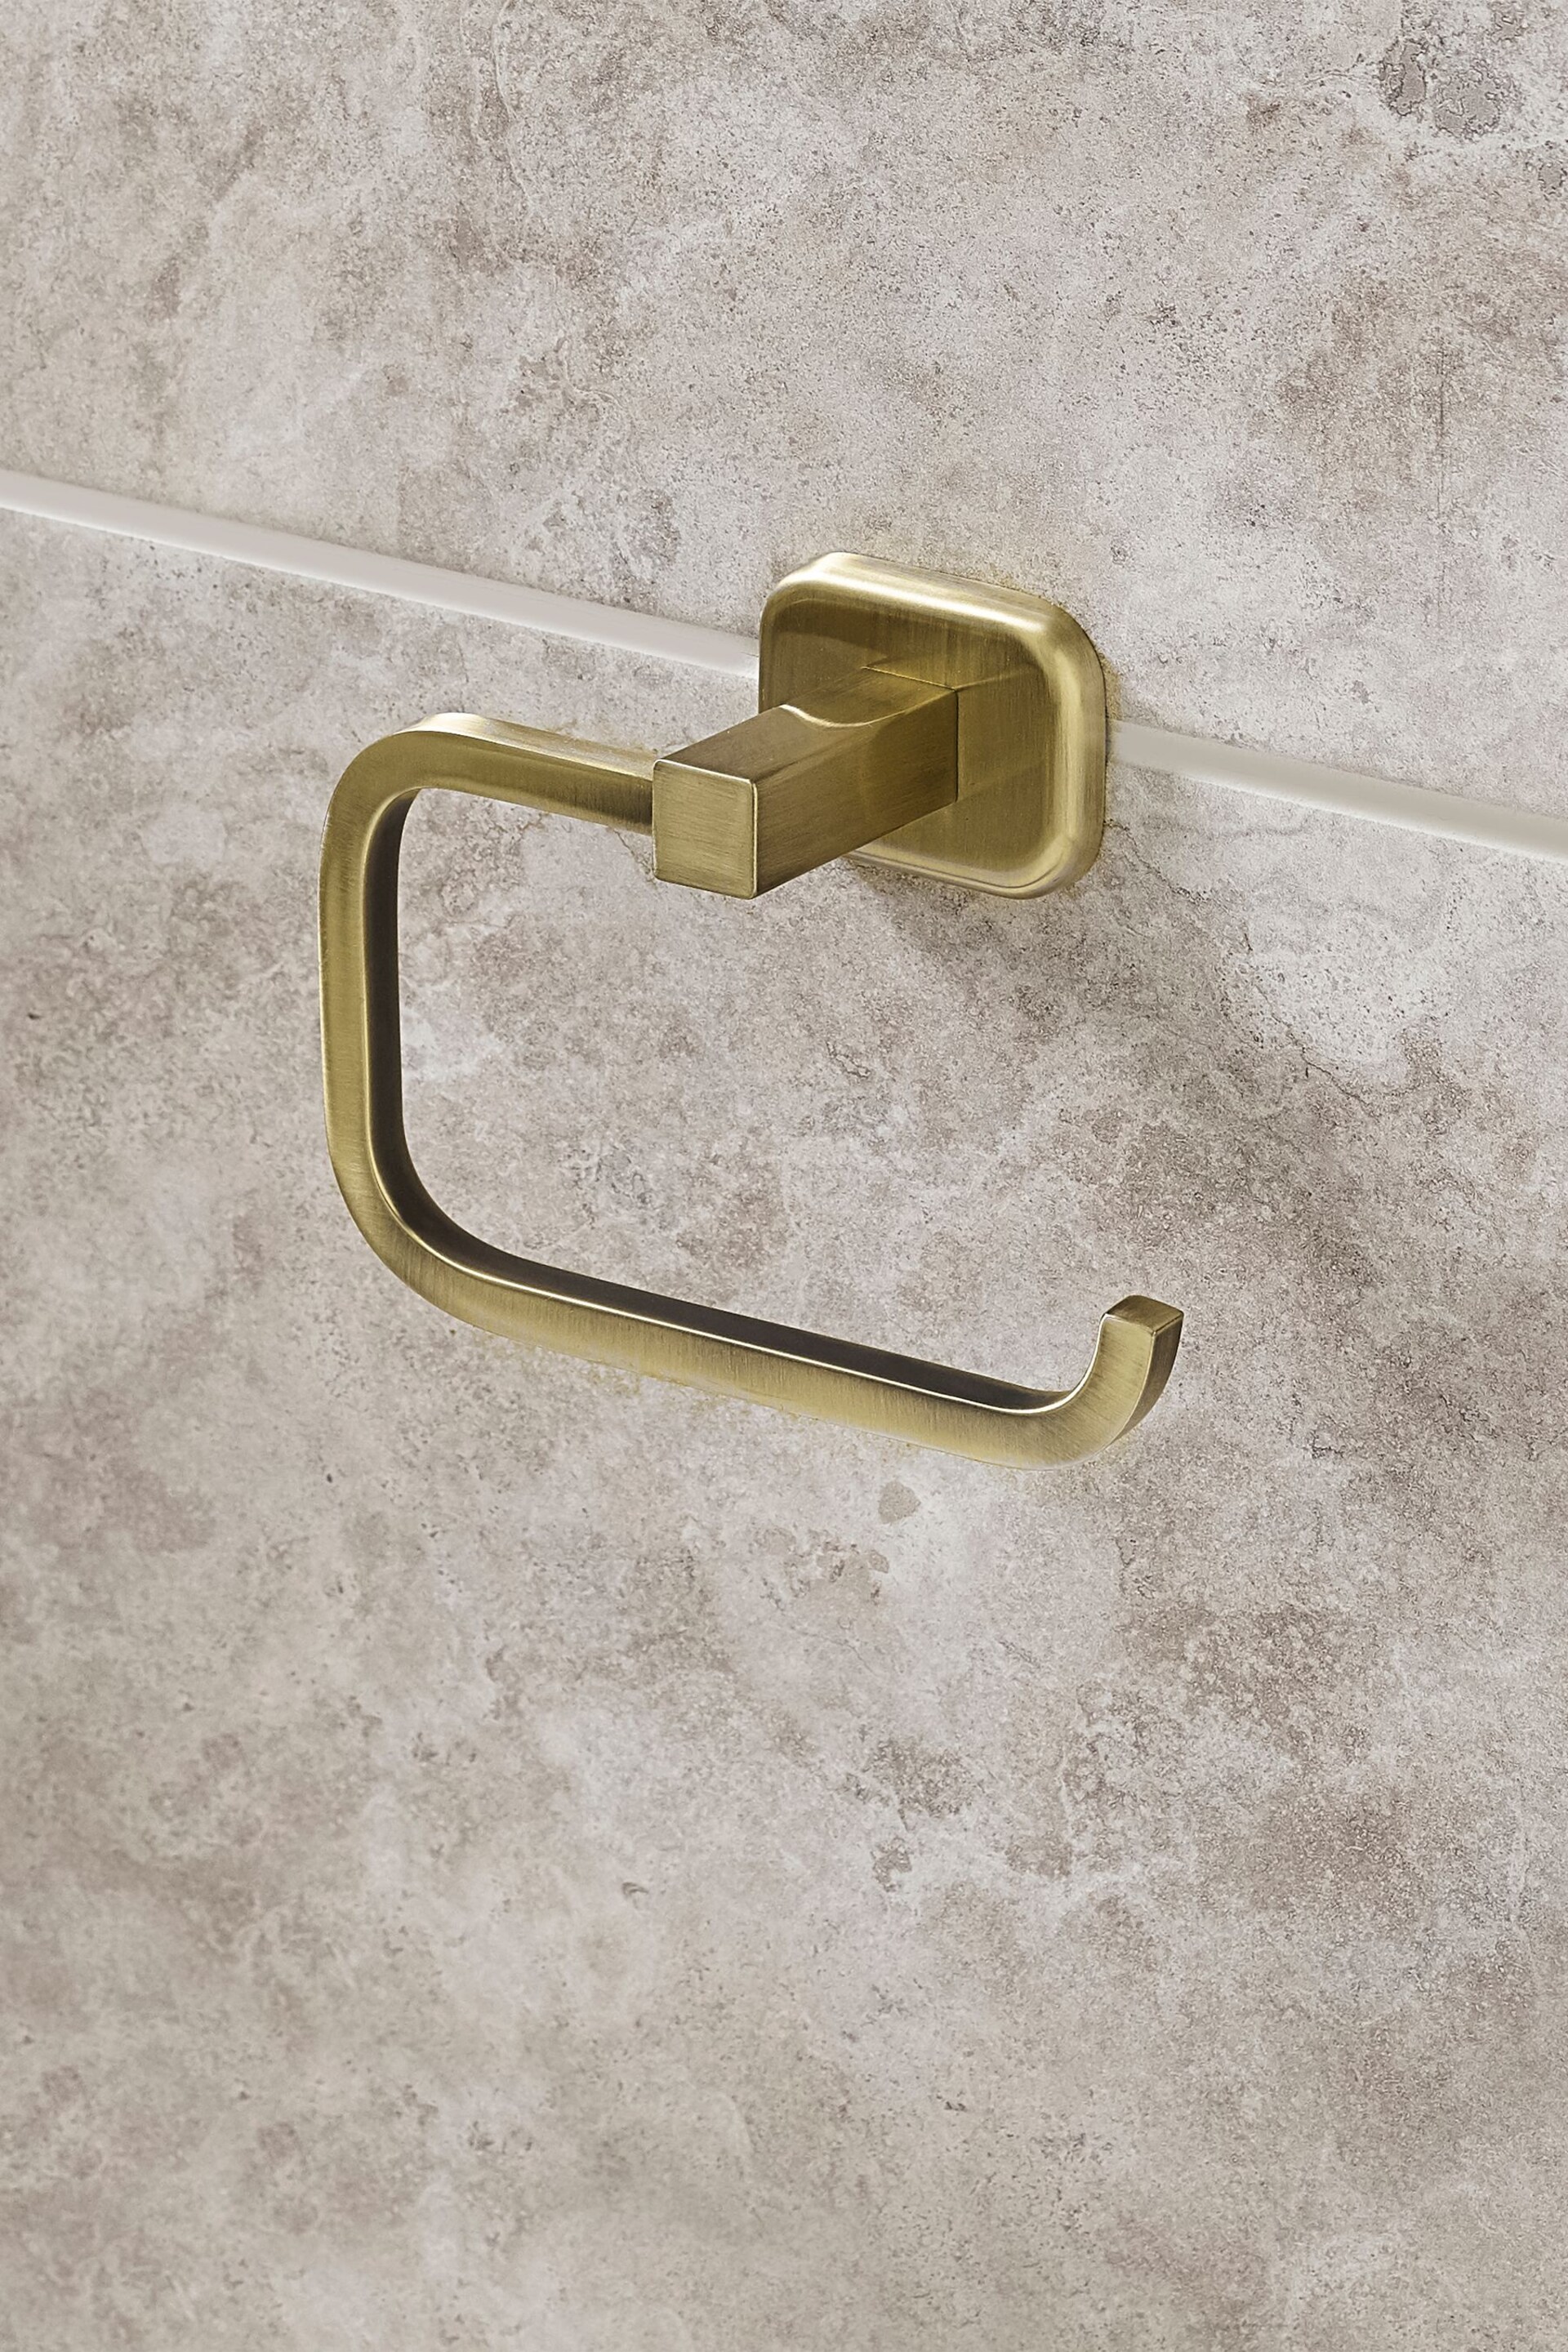 Gold Toilet Roll Holder - Image 2 of 6